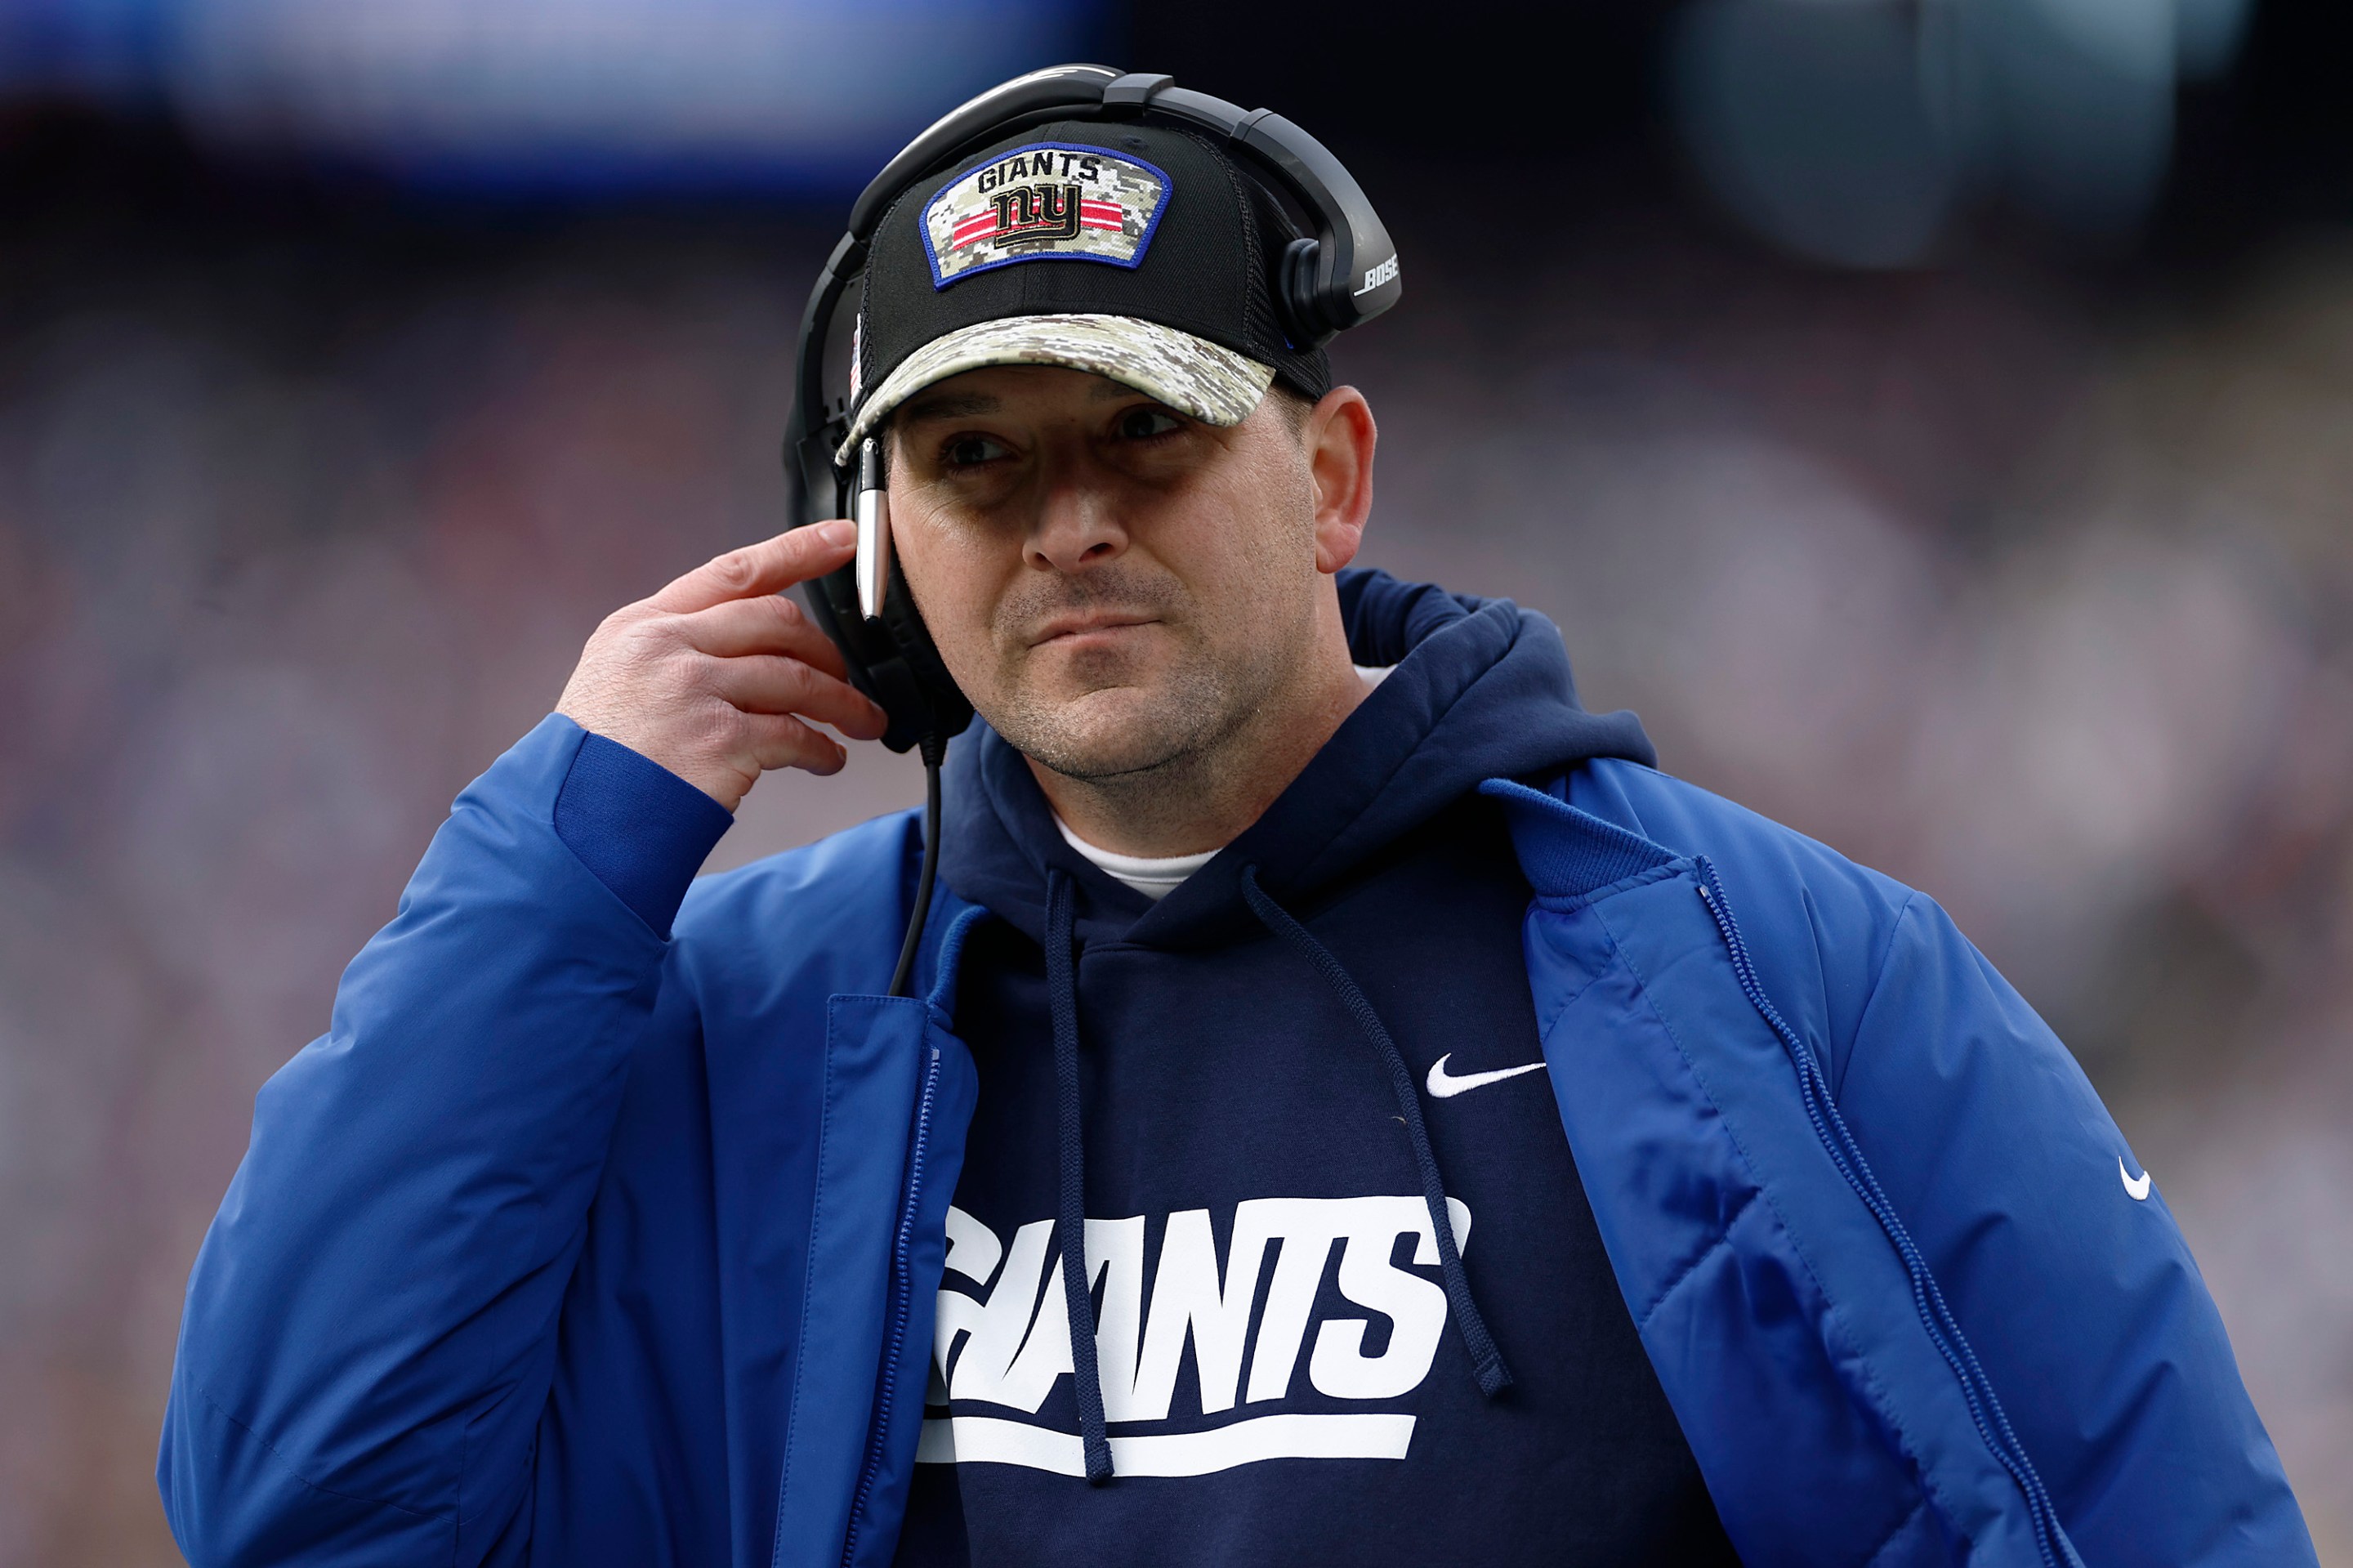 Head coach Joe Judge of the New York Giants looks on during the second quarter against the Dallas Cowboys at MetLife Stadium on December 19, 2021 in East Rutherford, New Jersey.